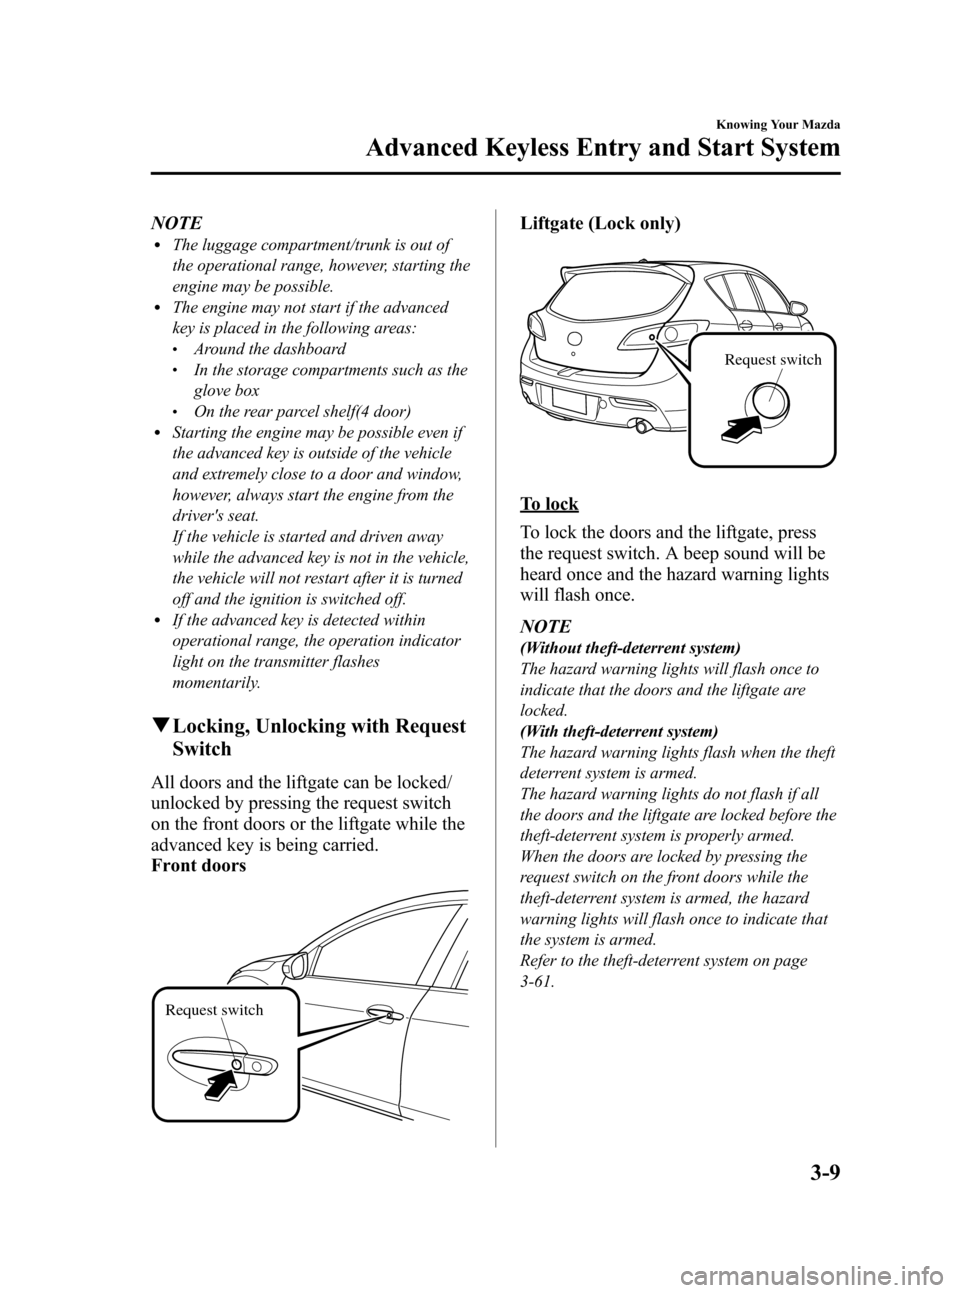 MAZDA MODEL 3 HATCHBACK 2011  Owners Manual (in English) Black plate (85,1)
NOTElThe luggage compartment/trunk is out of
the operational range, however, starting the
engine may be possible.
lThe engine may not start if the advanced
key is placed in the foll